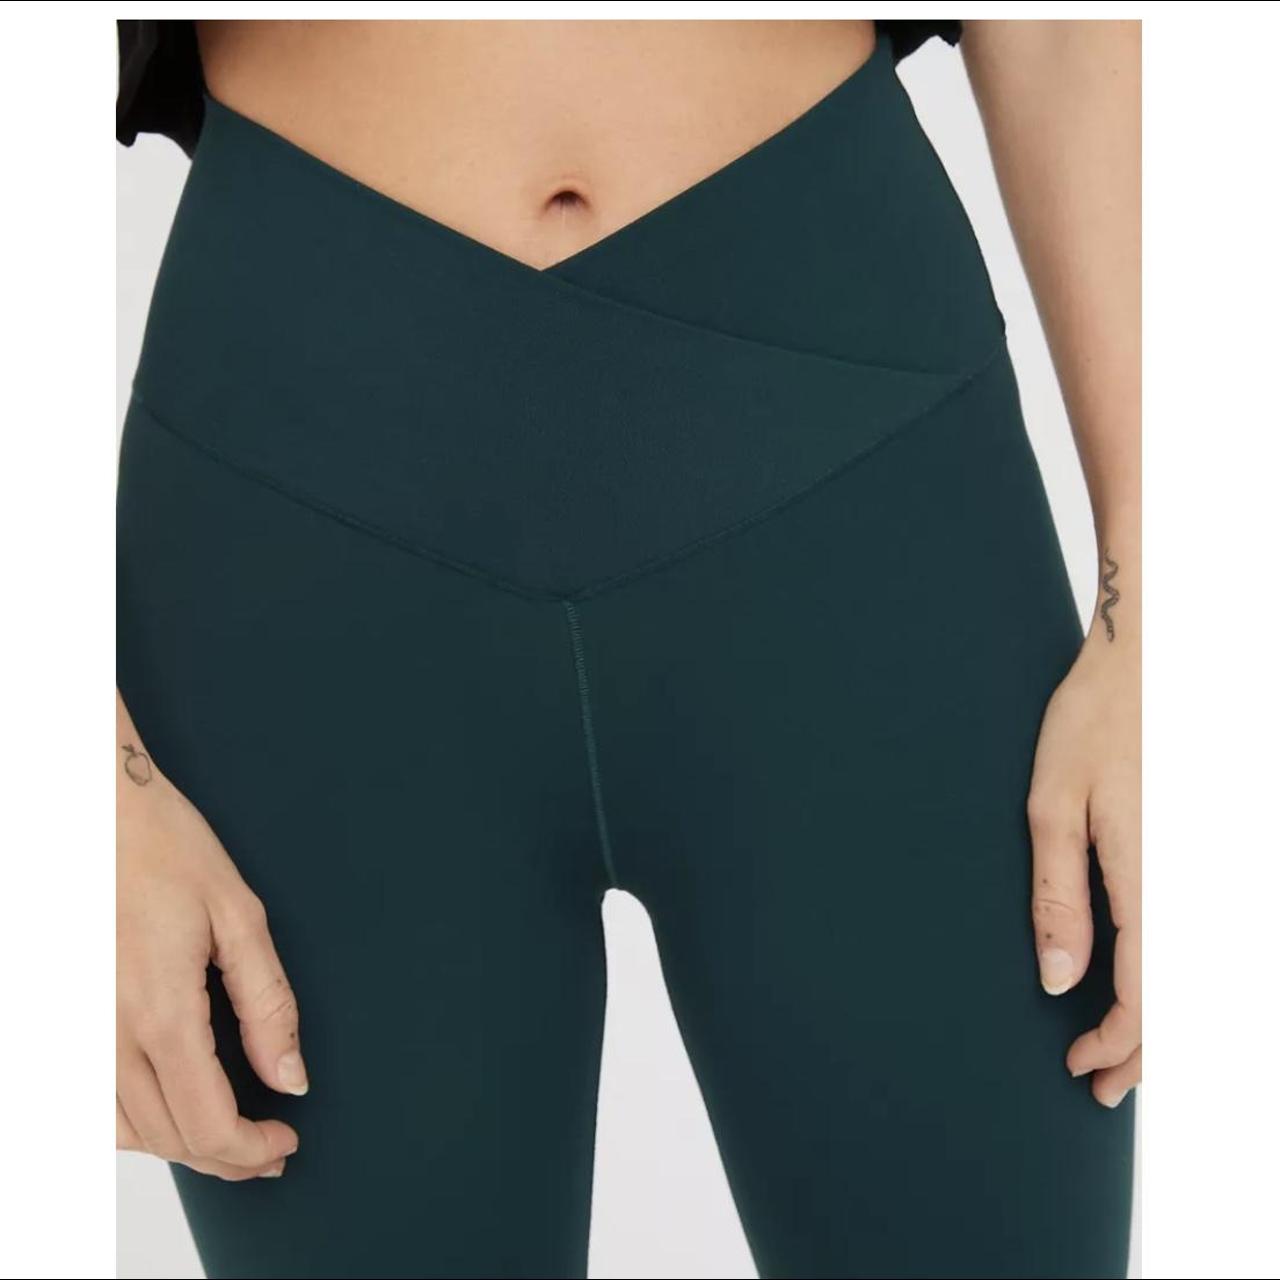 Green active leggings UNAVAILABLE FOR PURCHASE - Depop